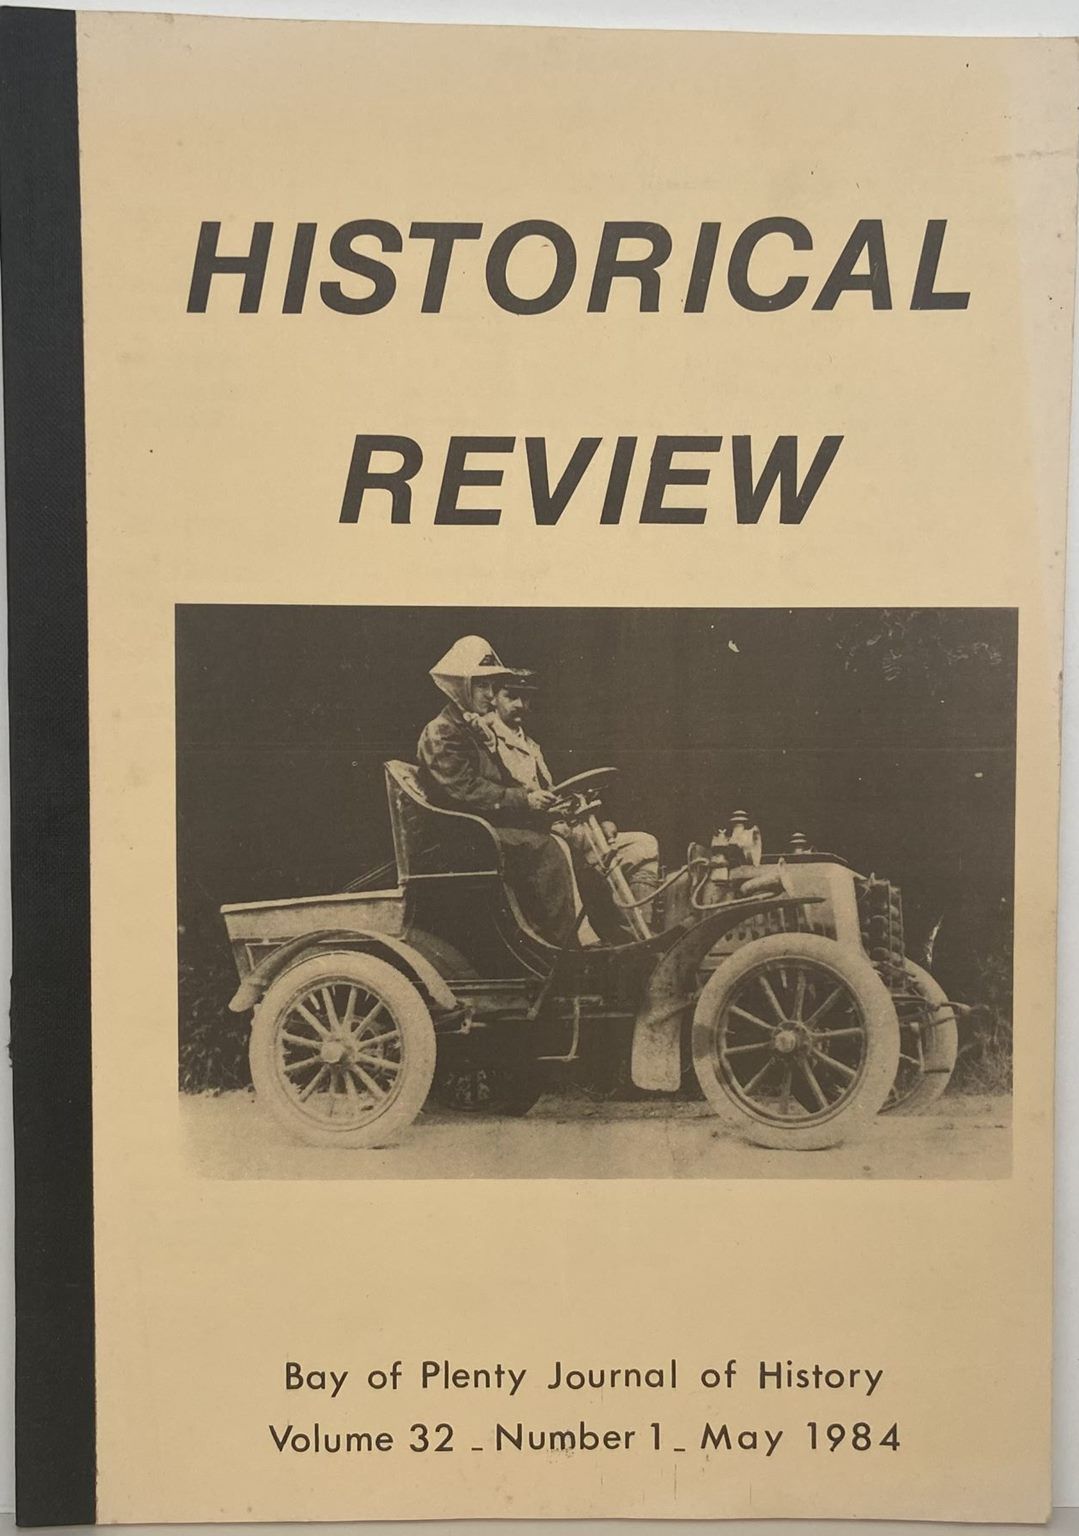 HISTORICAL REVIEW: Bay of Plenty Journal of History - Volume 32, Number 1